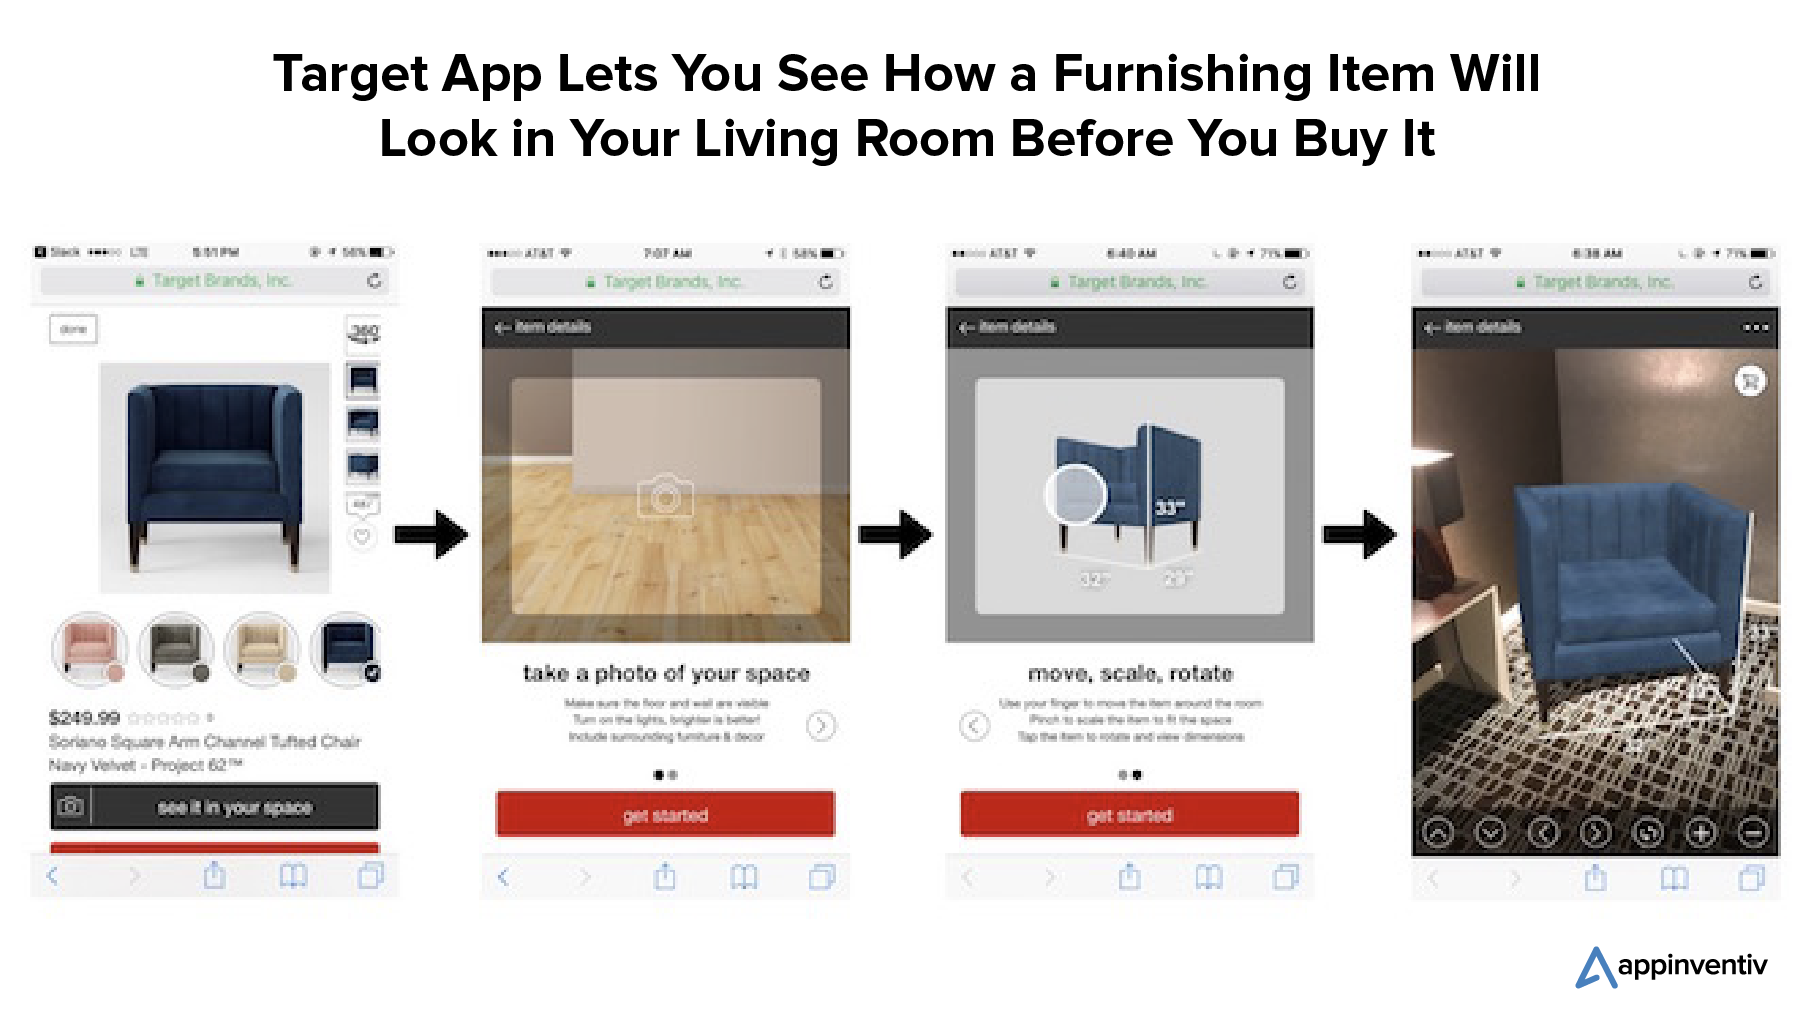 Target App Lets You See How a Furnishing Item Will Look in Your Living Room Before You Buy It